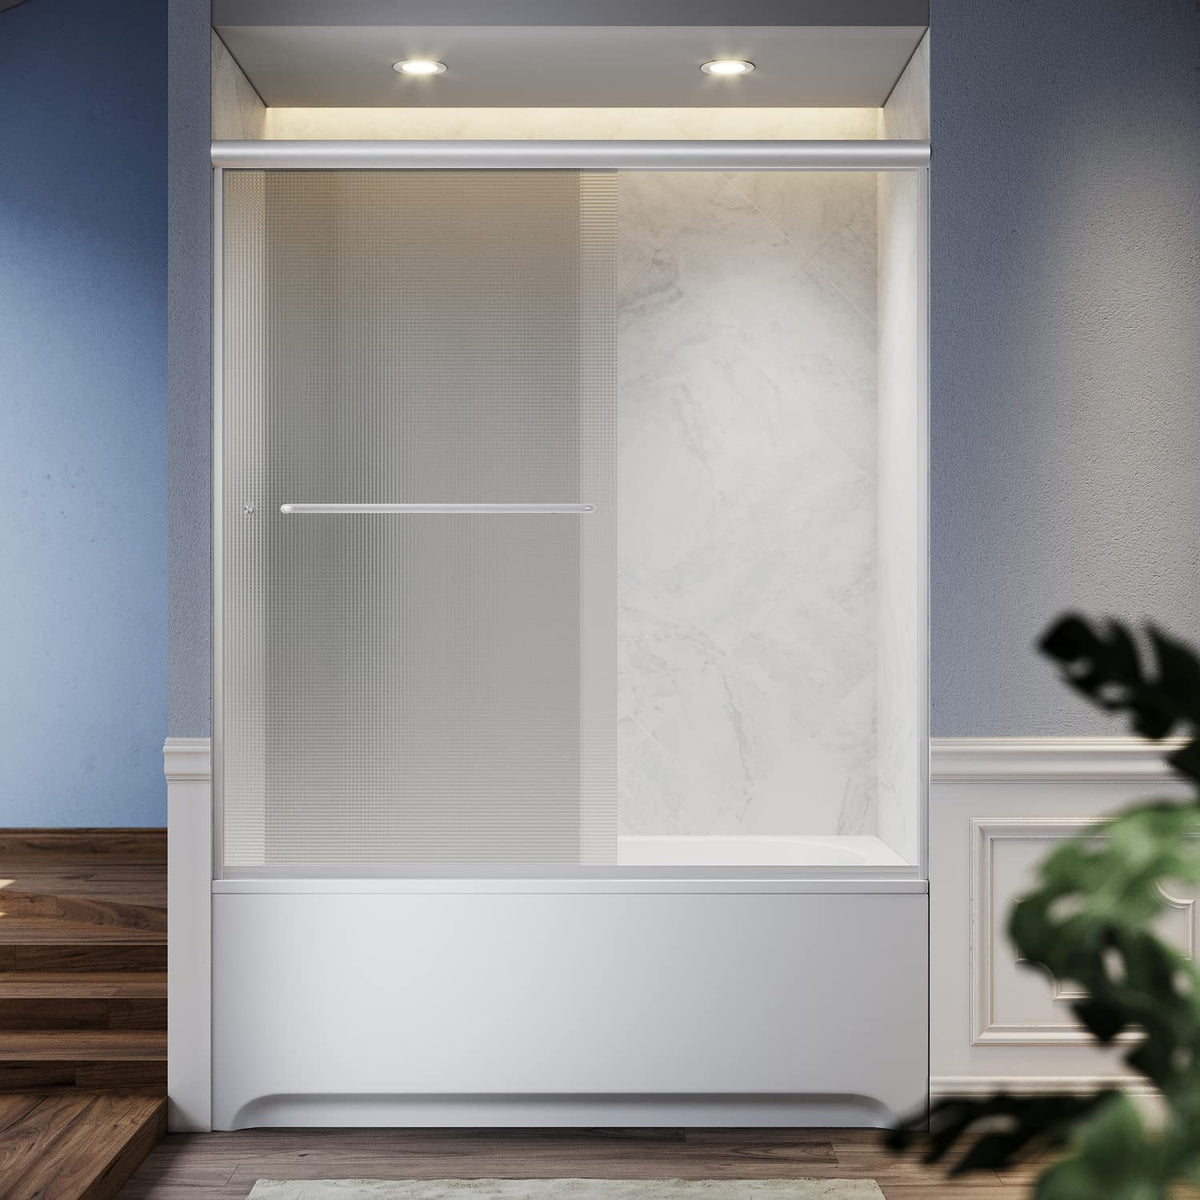 SUNNY SHOWER 60 in. W x 57.4 in. H Frosted Glass Brushed Nickel Finish Sliding Bathtub Door